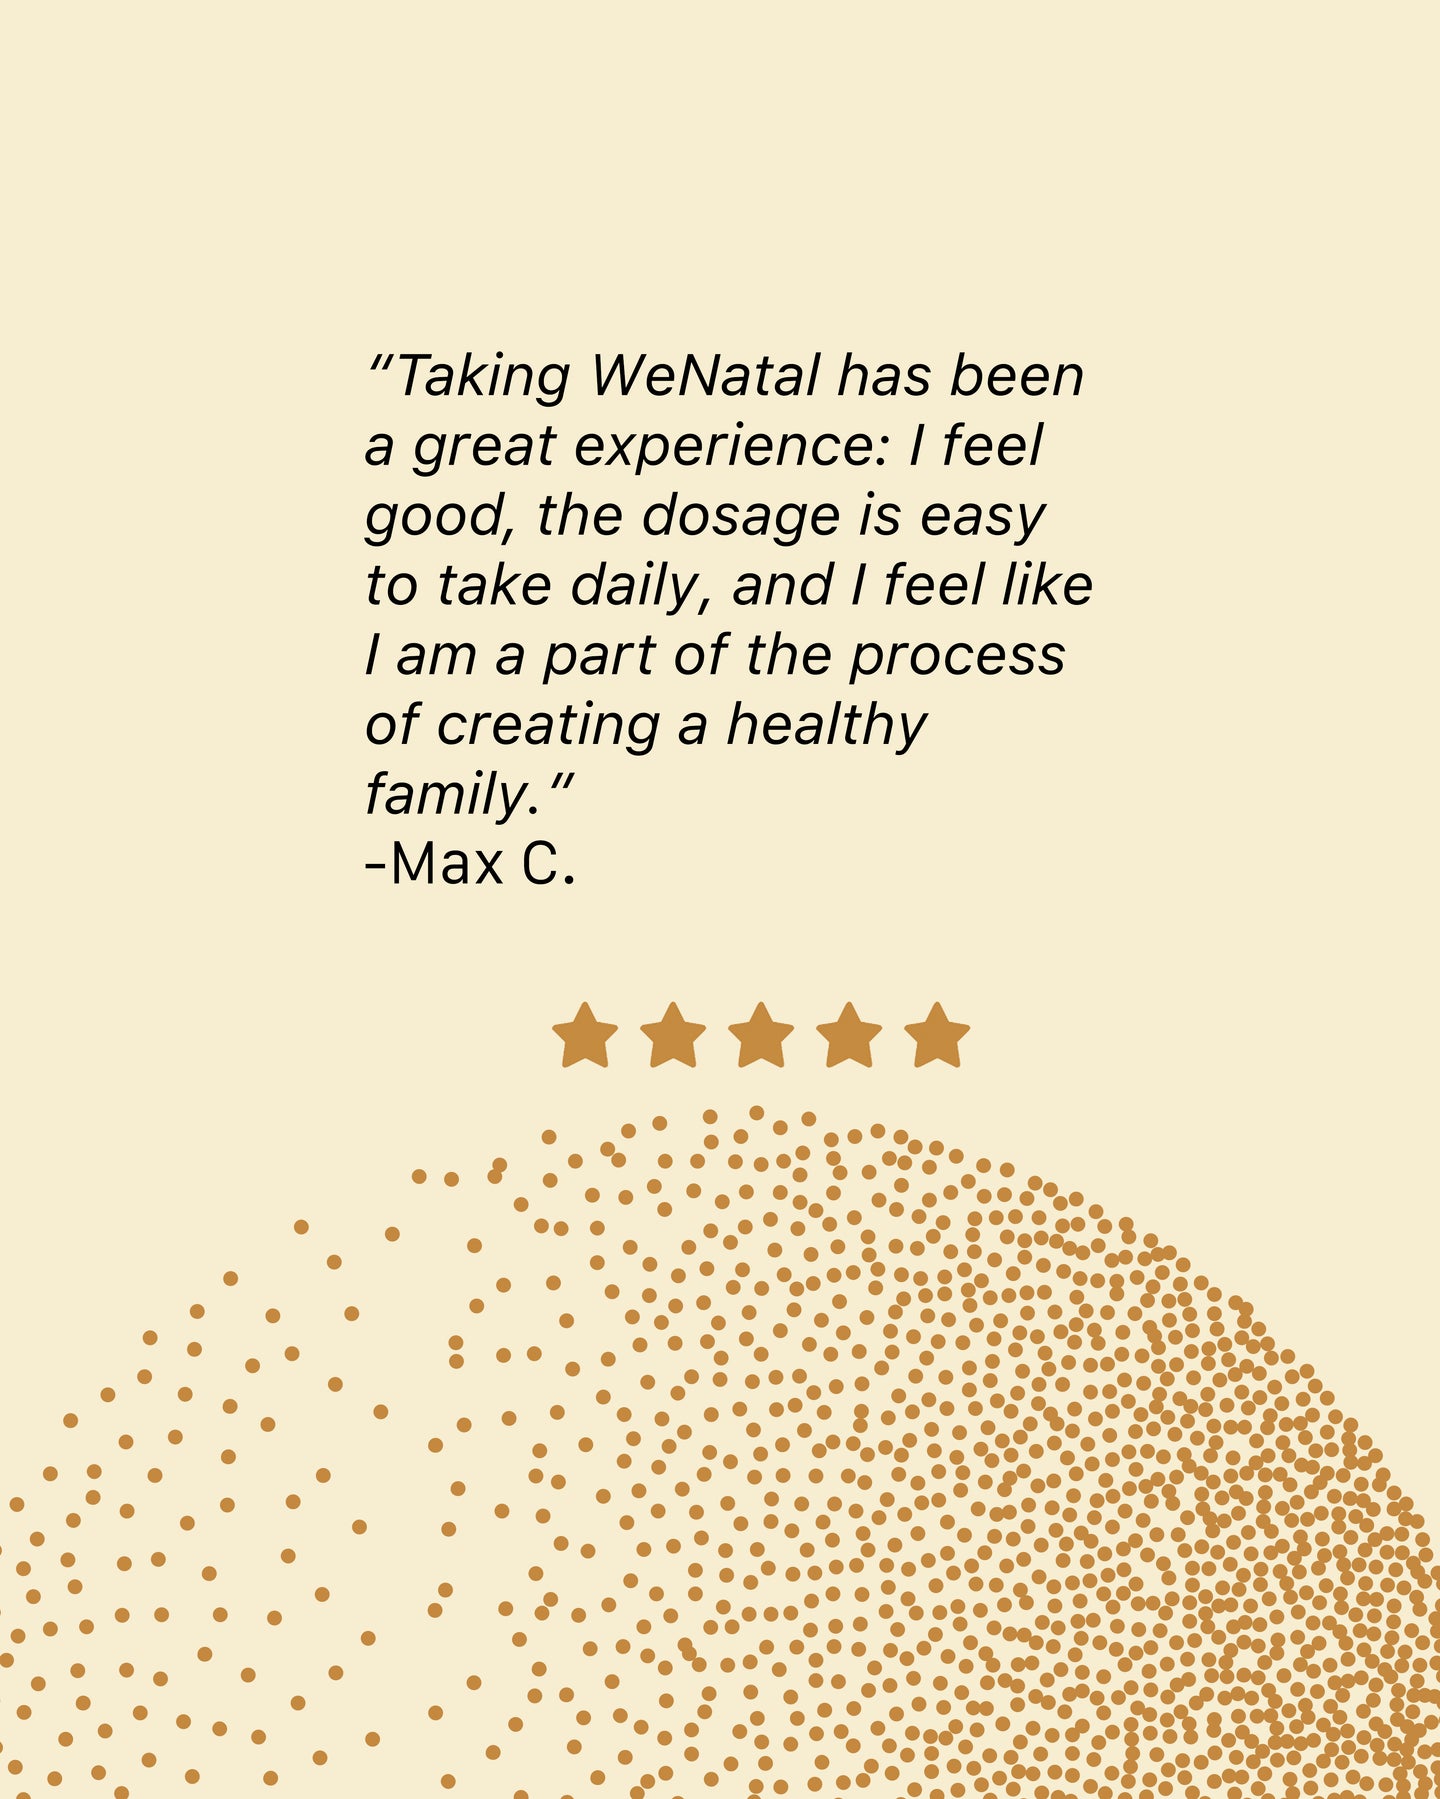 A review left by Max C Taking WeNatal has been a great experience I feel good the dosage is easy to take daily and I feel like I am a part of the process of creating a healthy family